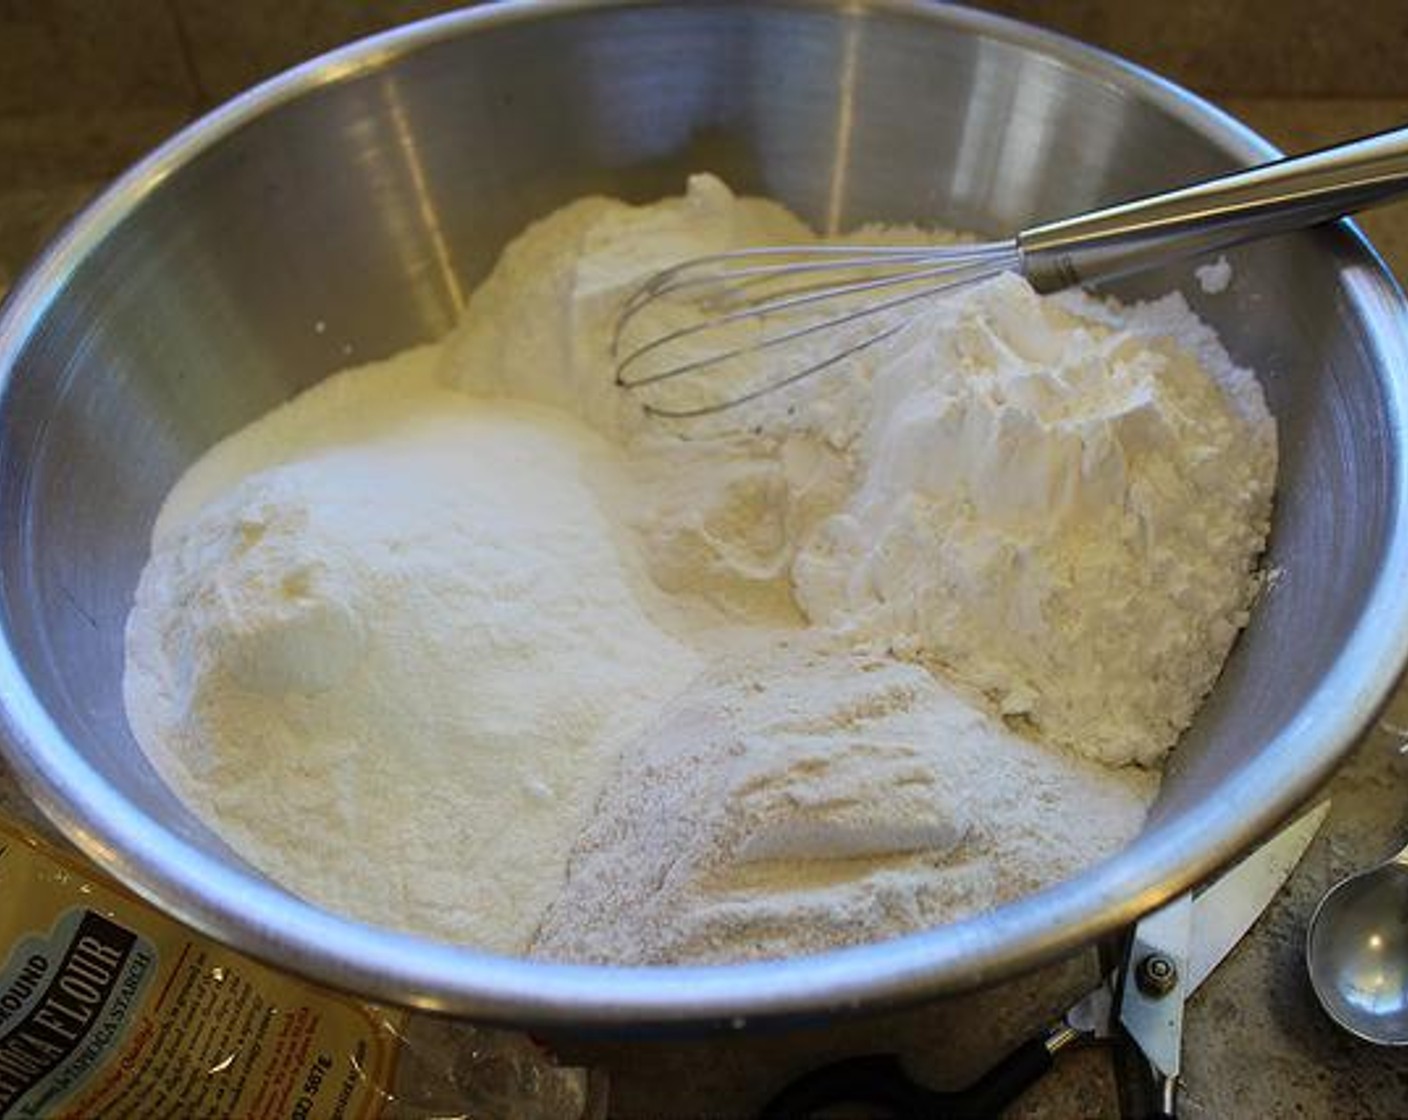 step 1 Pour Brown Rice Flour (4 cups), Rice Flour (4 3/4 cups), Sweet Glutinous Rice Flour (4 1/2 cups), Tapioca Starch (4 1/2 cups) and Xanthan Gum (2 1/2 Tbsp) into an extra large bowl.